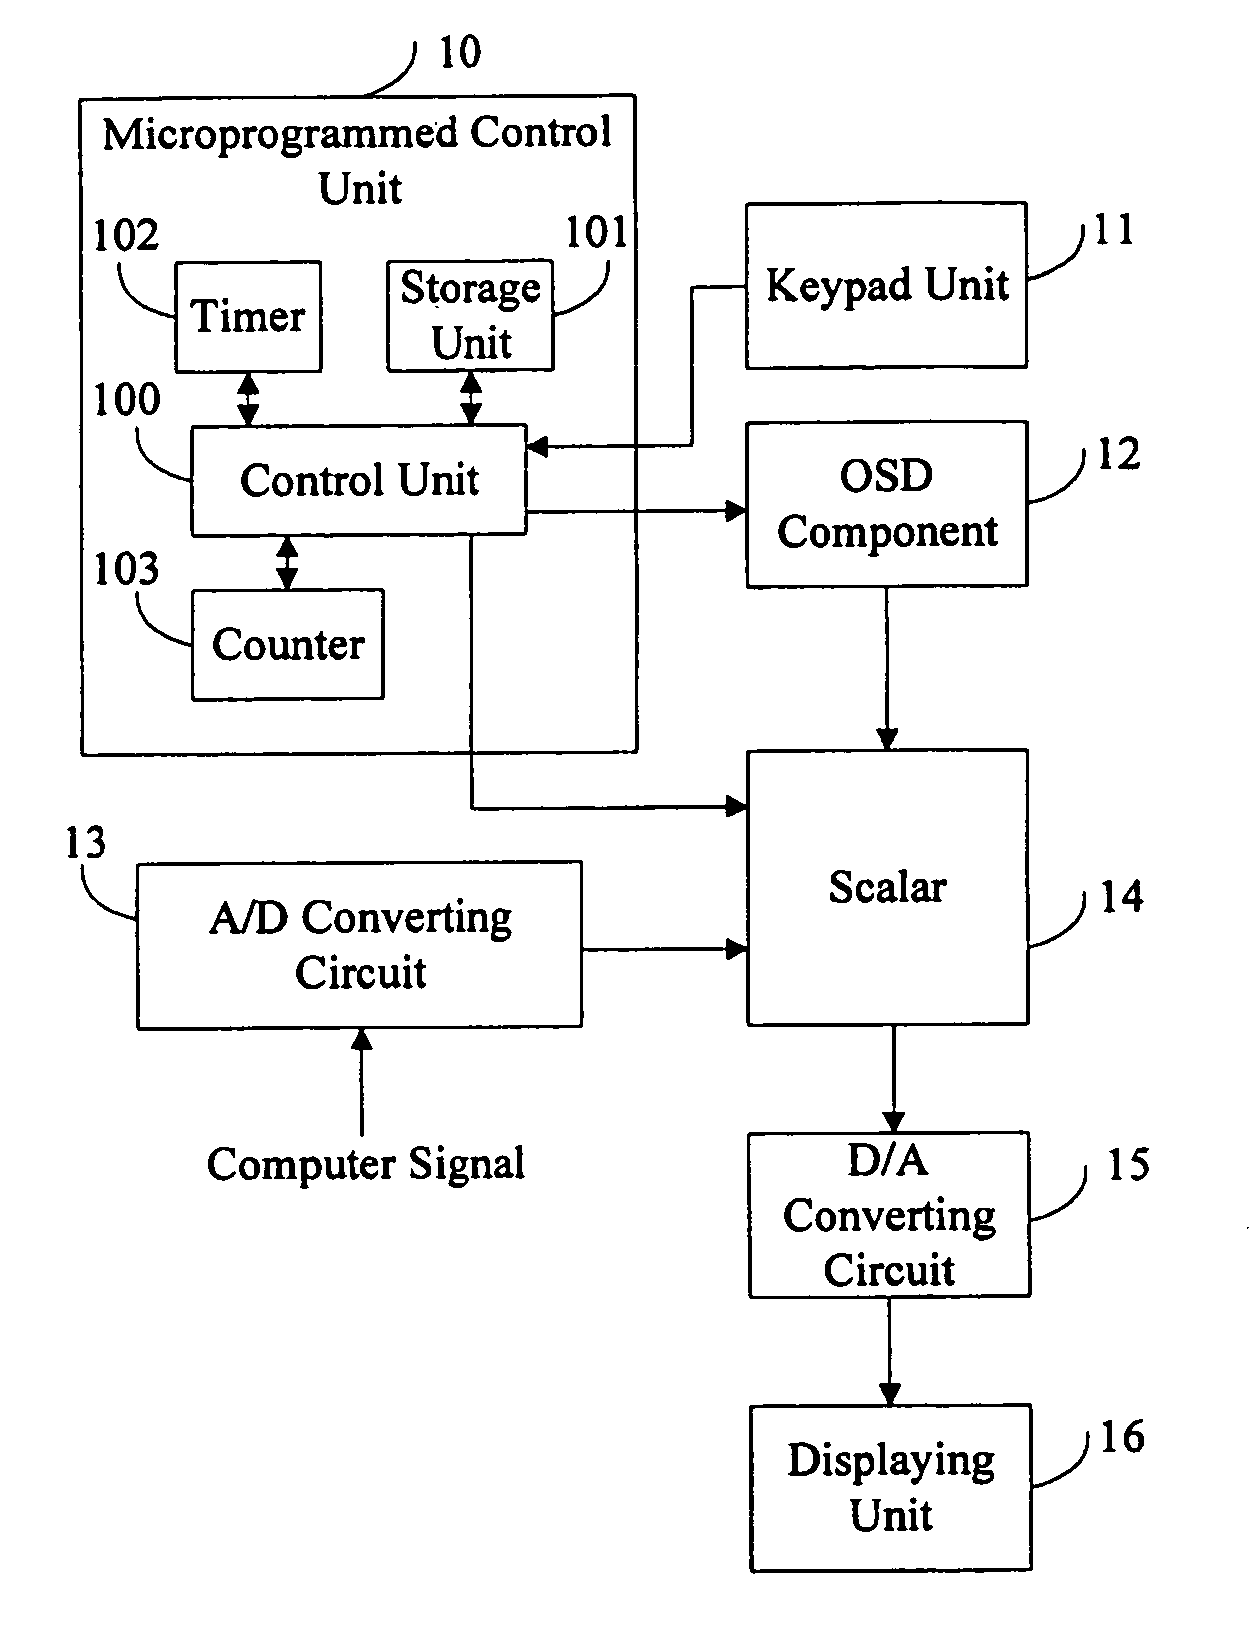 System and method for avoiding eye and bodily injury from using a display device